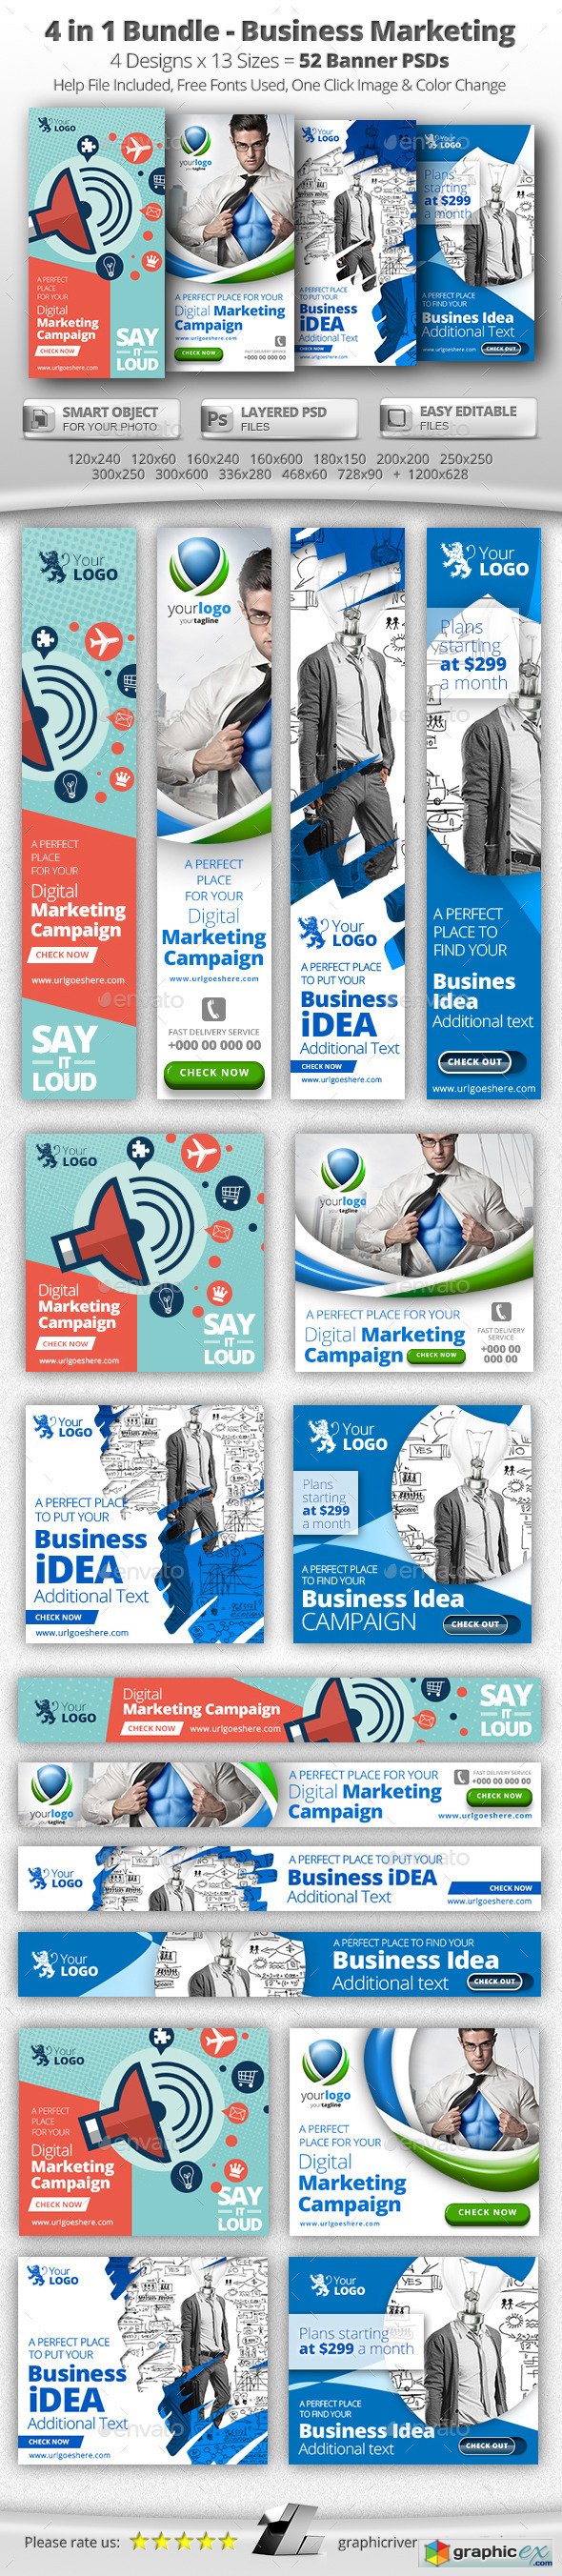 52 Business Marketing Web Banners - 4 in 1 Bundle